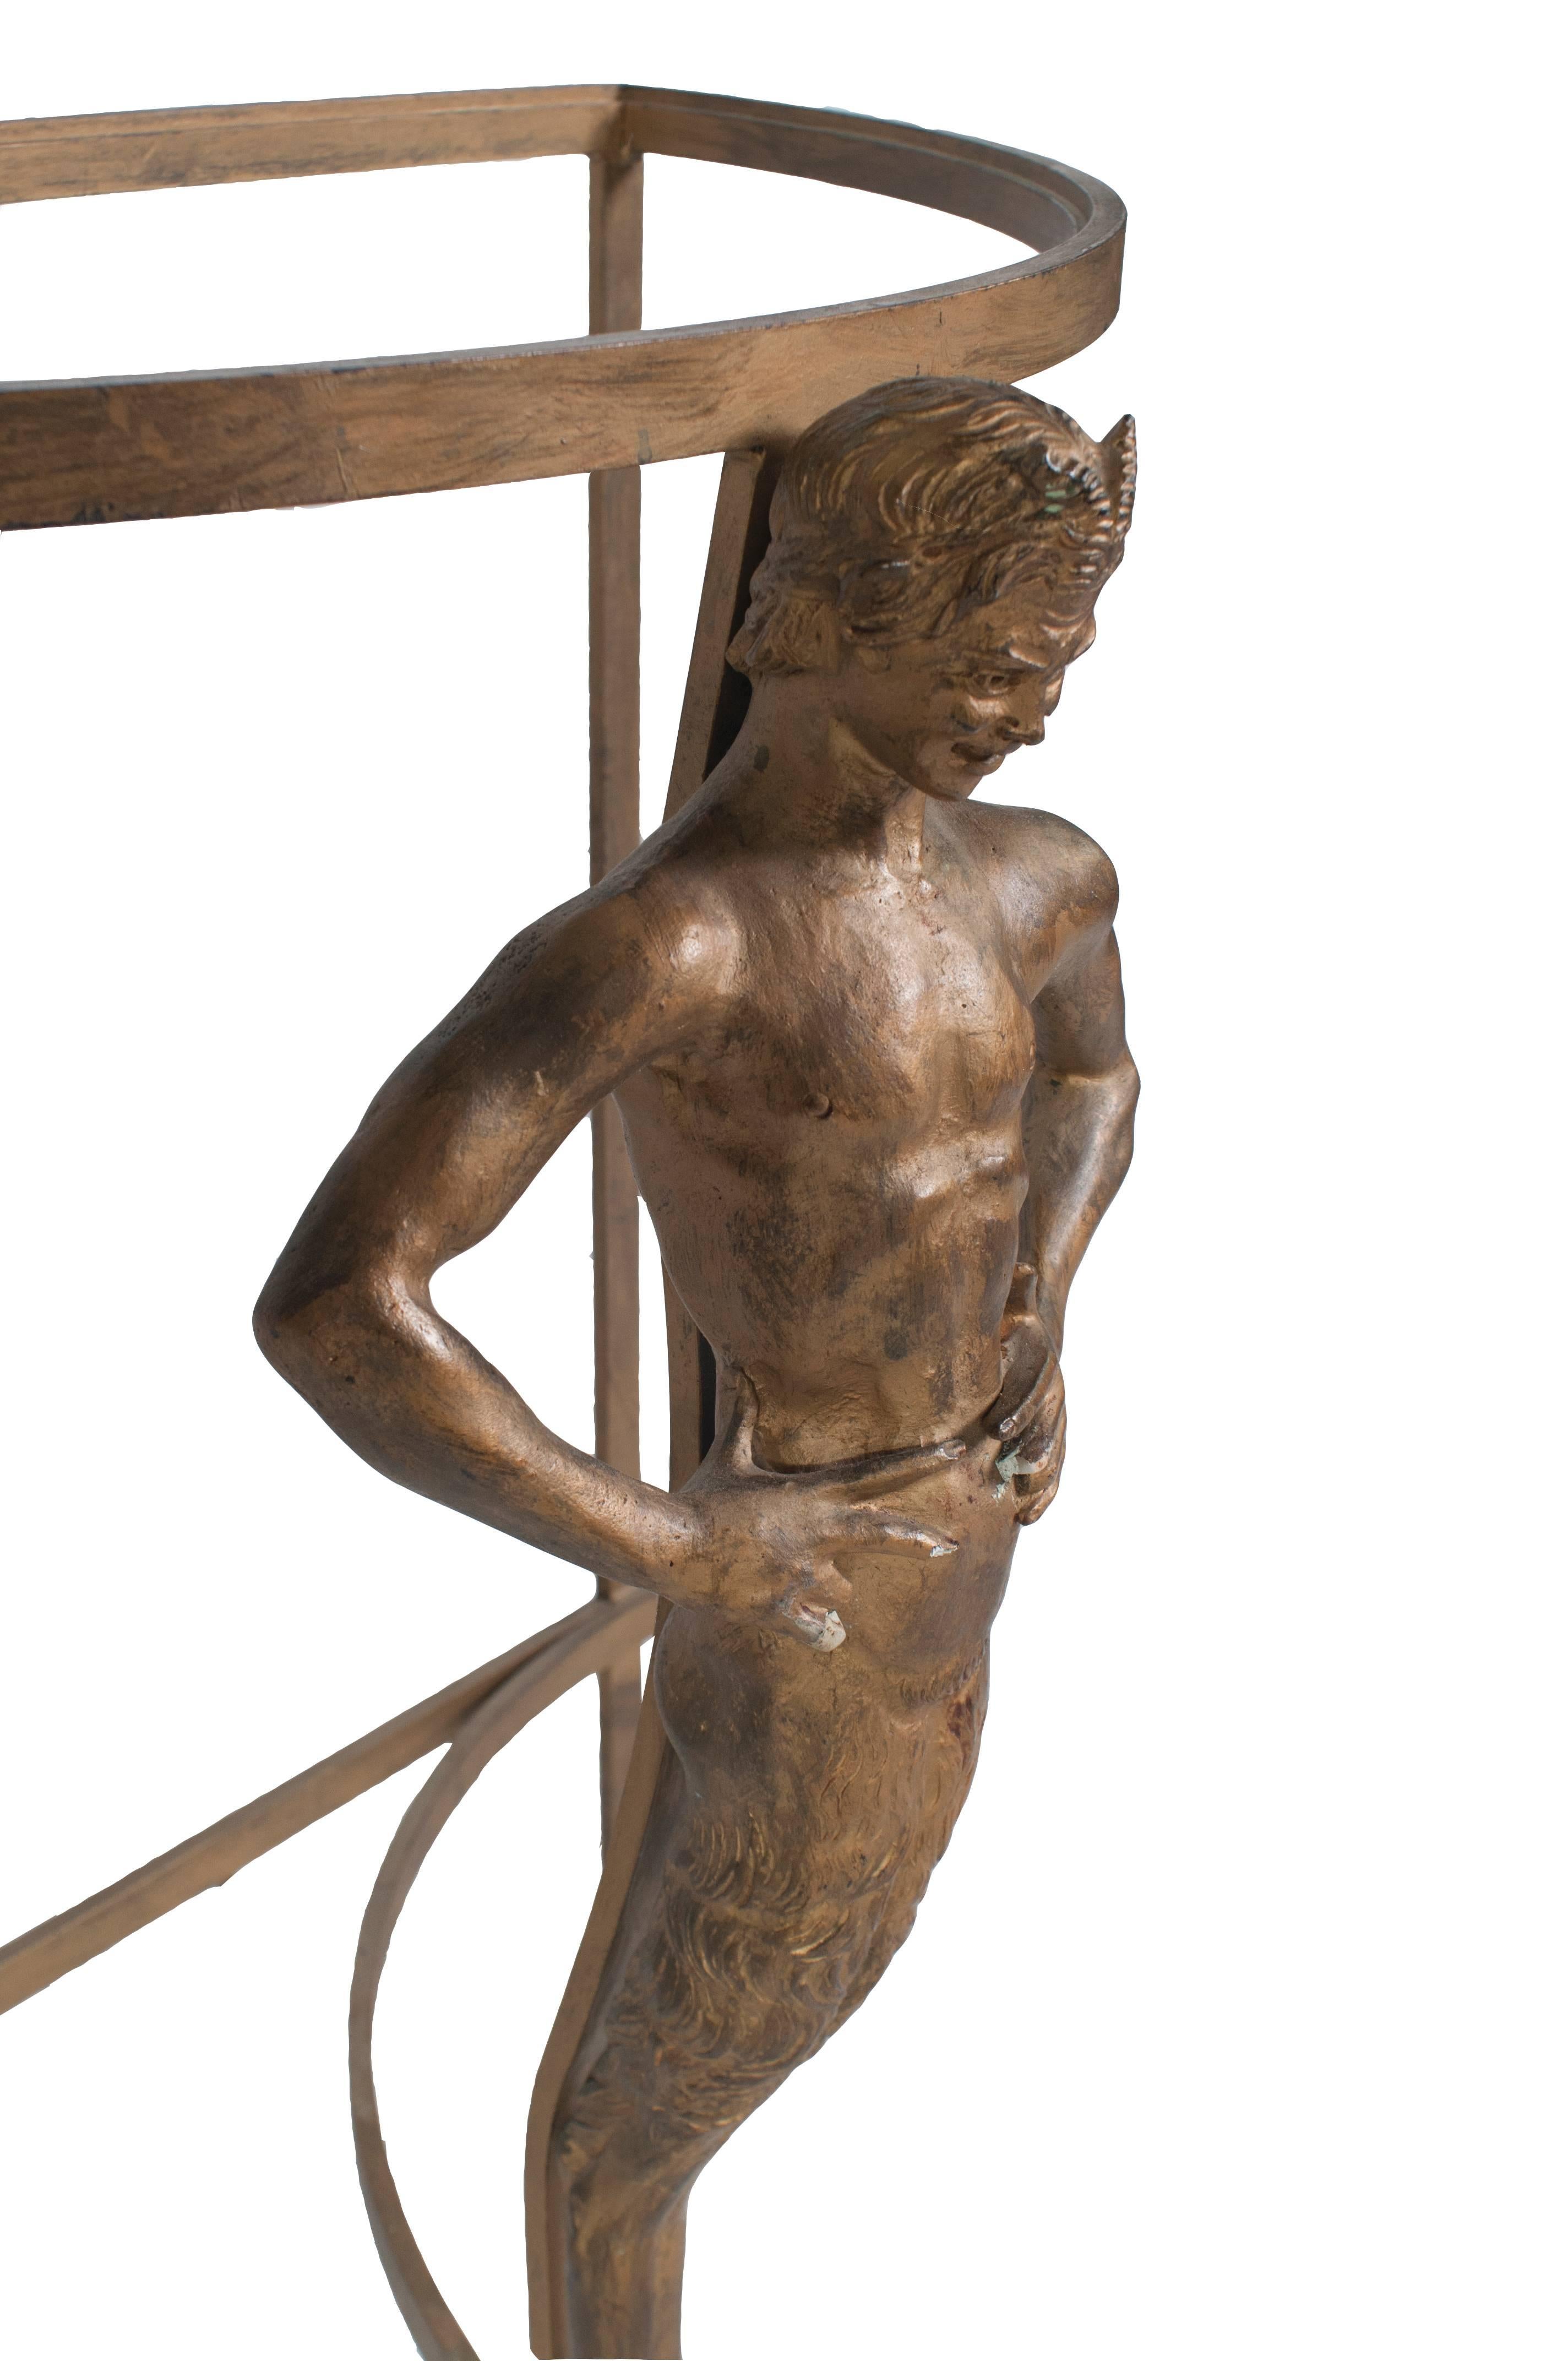 Metal demilune table with a faun leg and glass top.